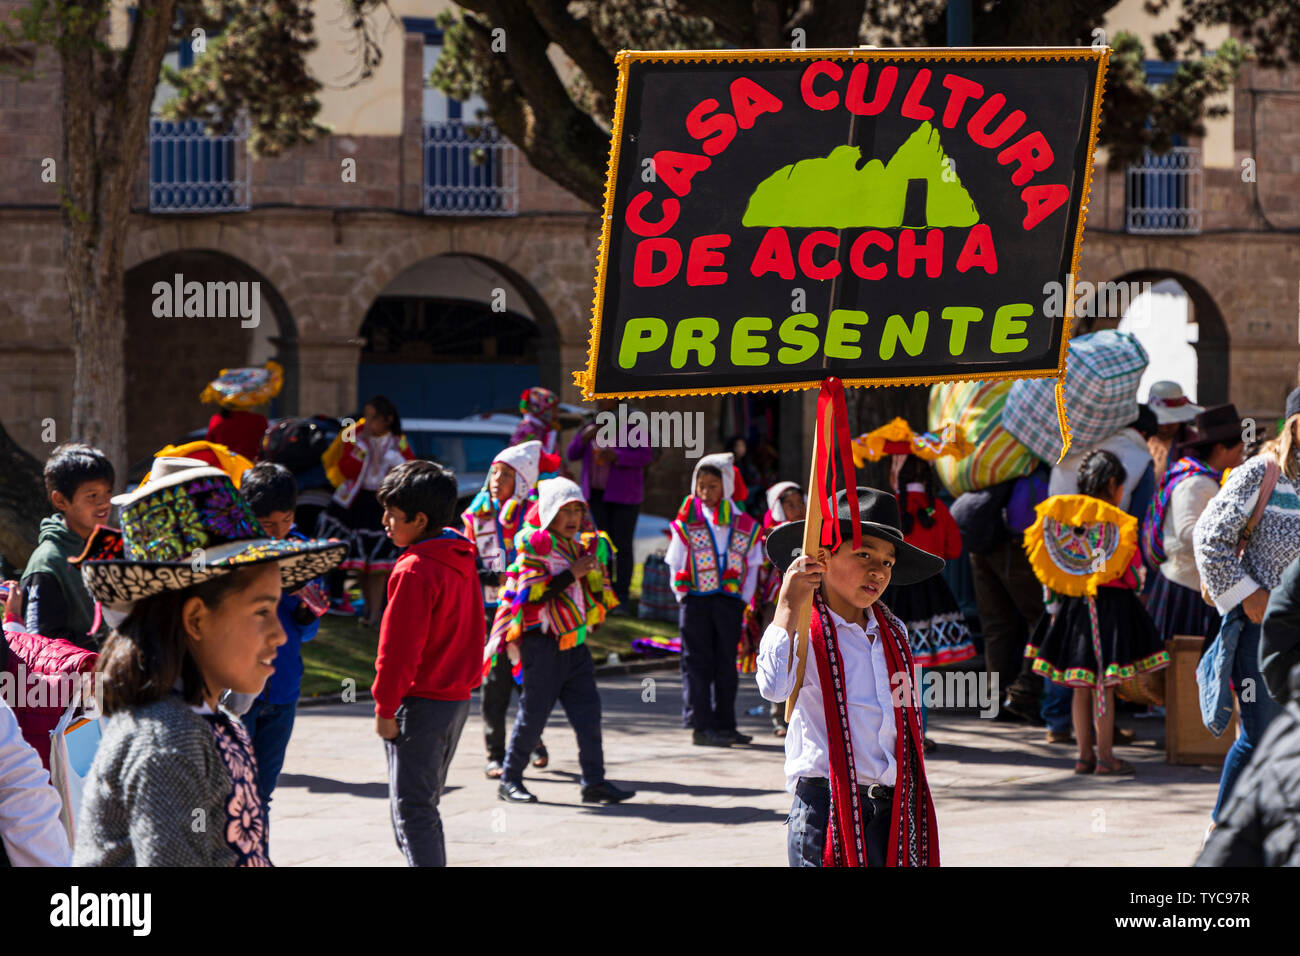 Children in traditional dress protesting for their rights to adequate housing, education and health care, Cusco, Peru, South America, Stock Photo